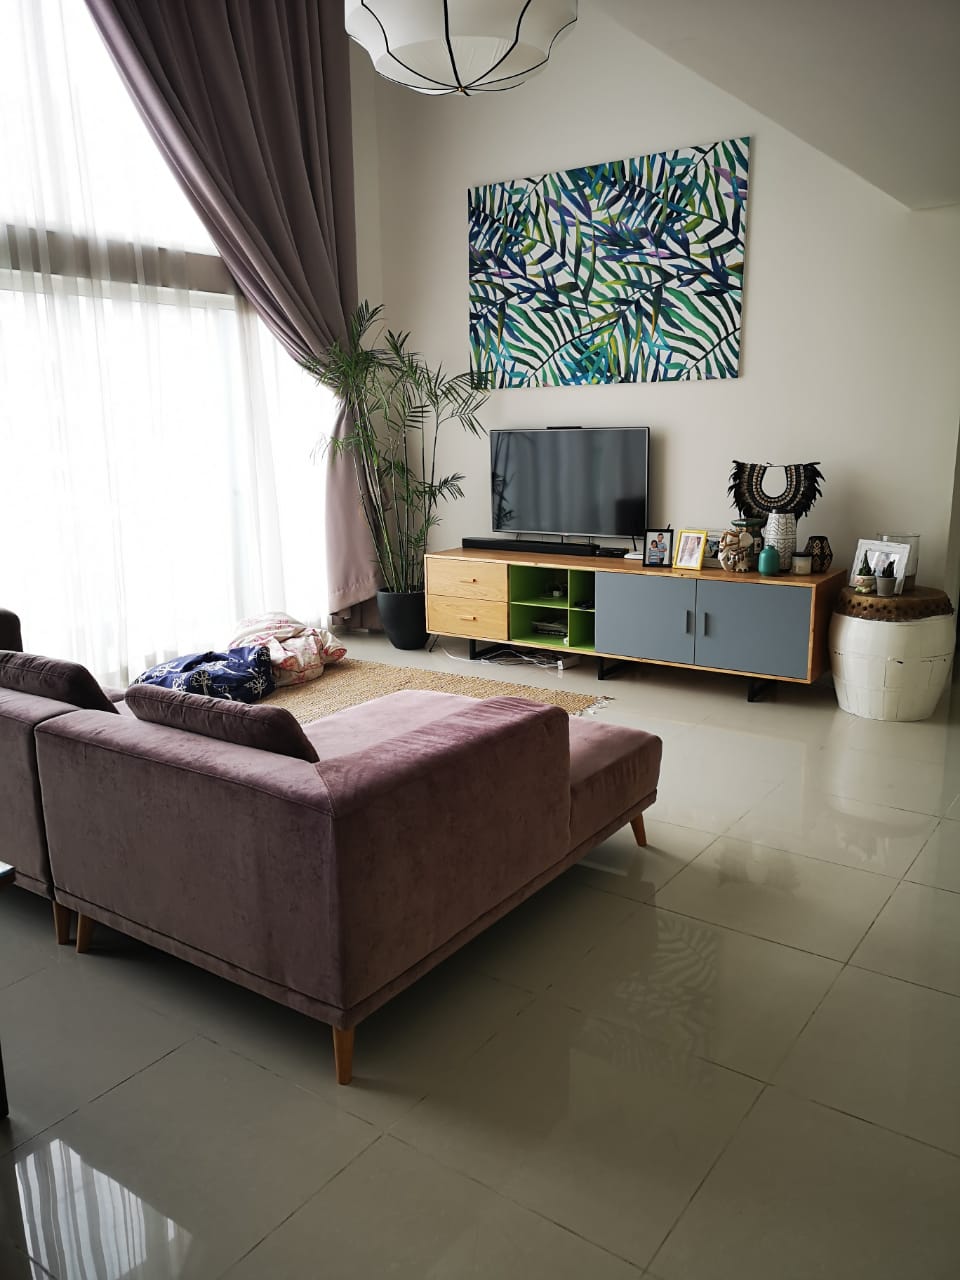 4 Bedroom Apartment (The Estella) for sale in An Phu Ward, District 2, Ho Chi Minh City.